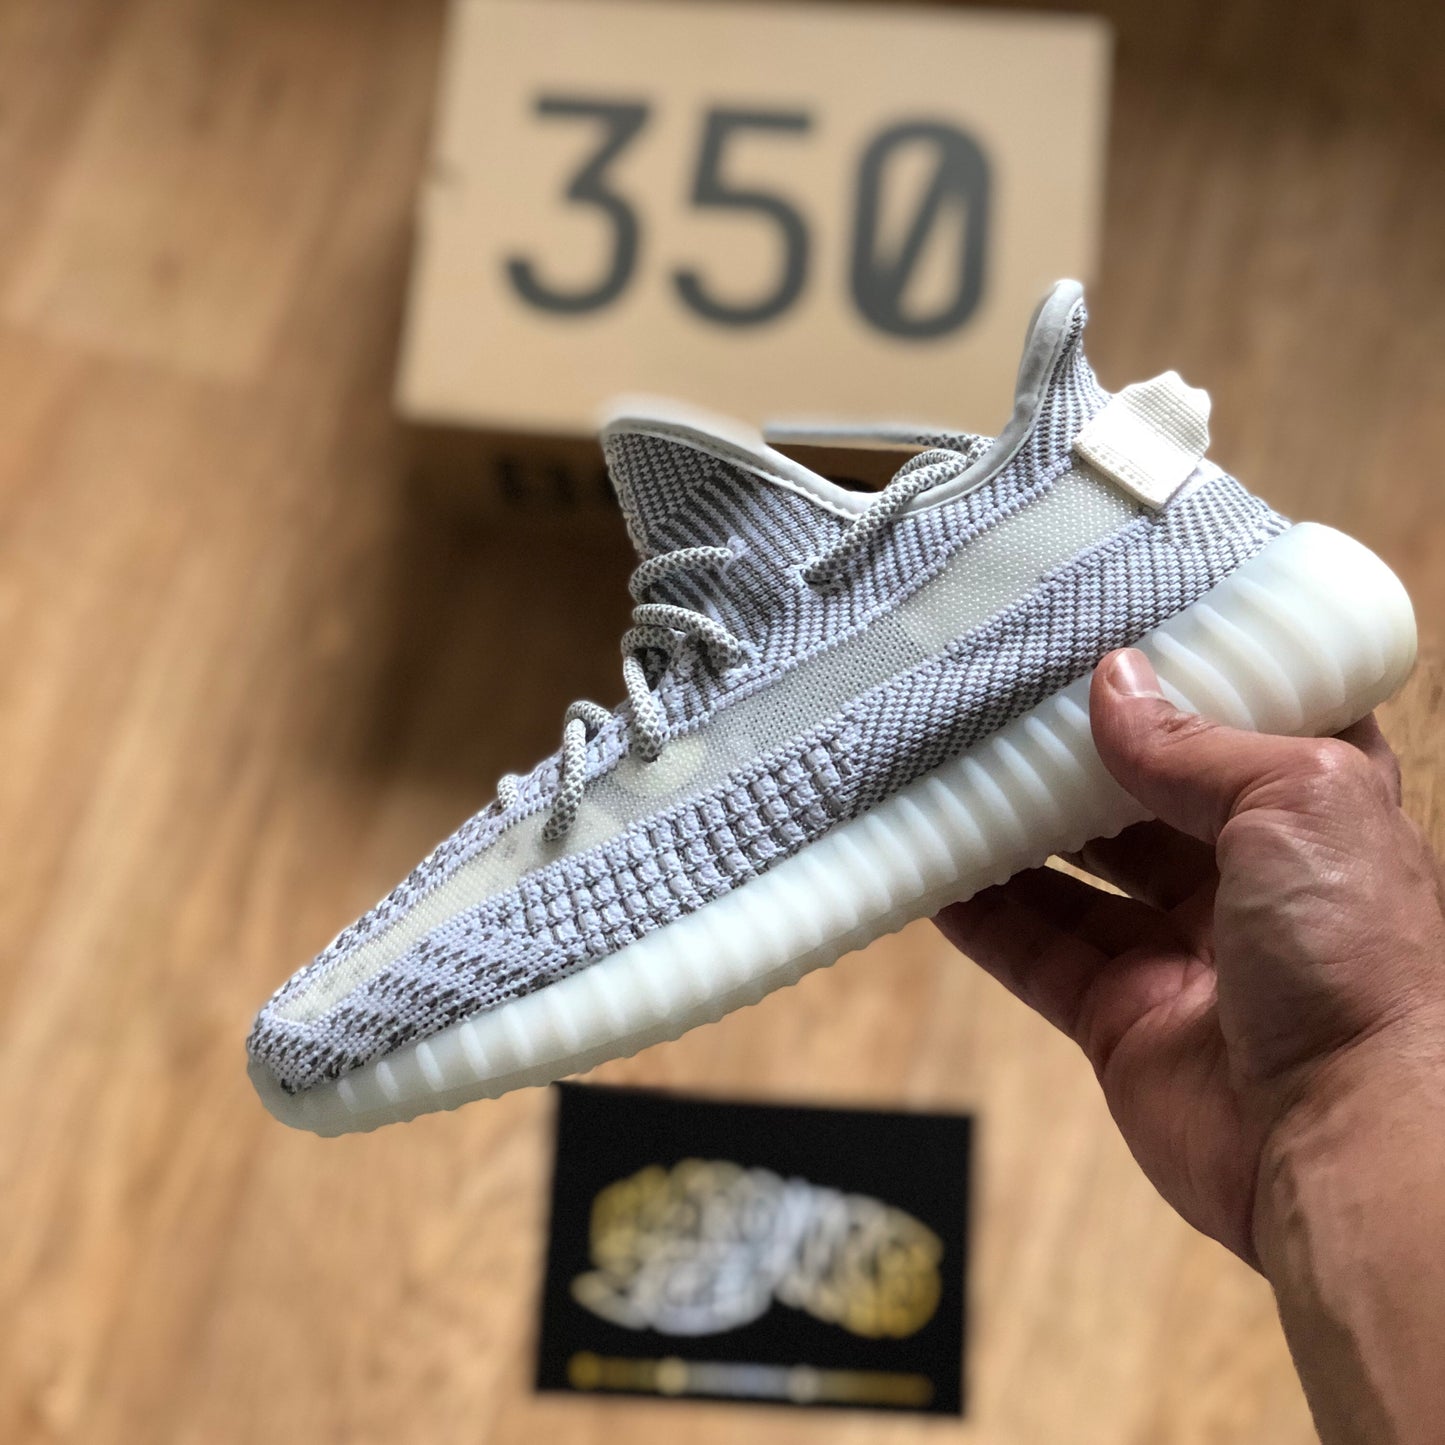 Yeezy Boost 350 V2 - Static (non reflective)